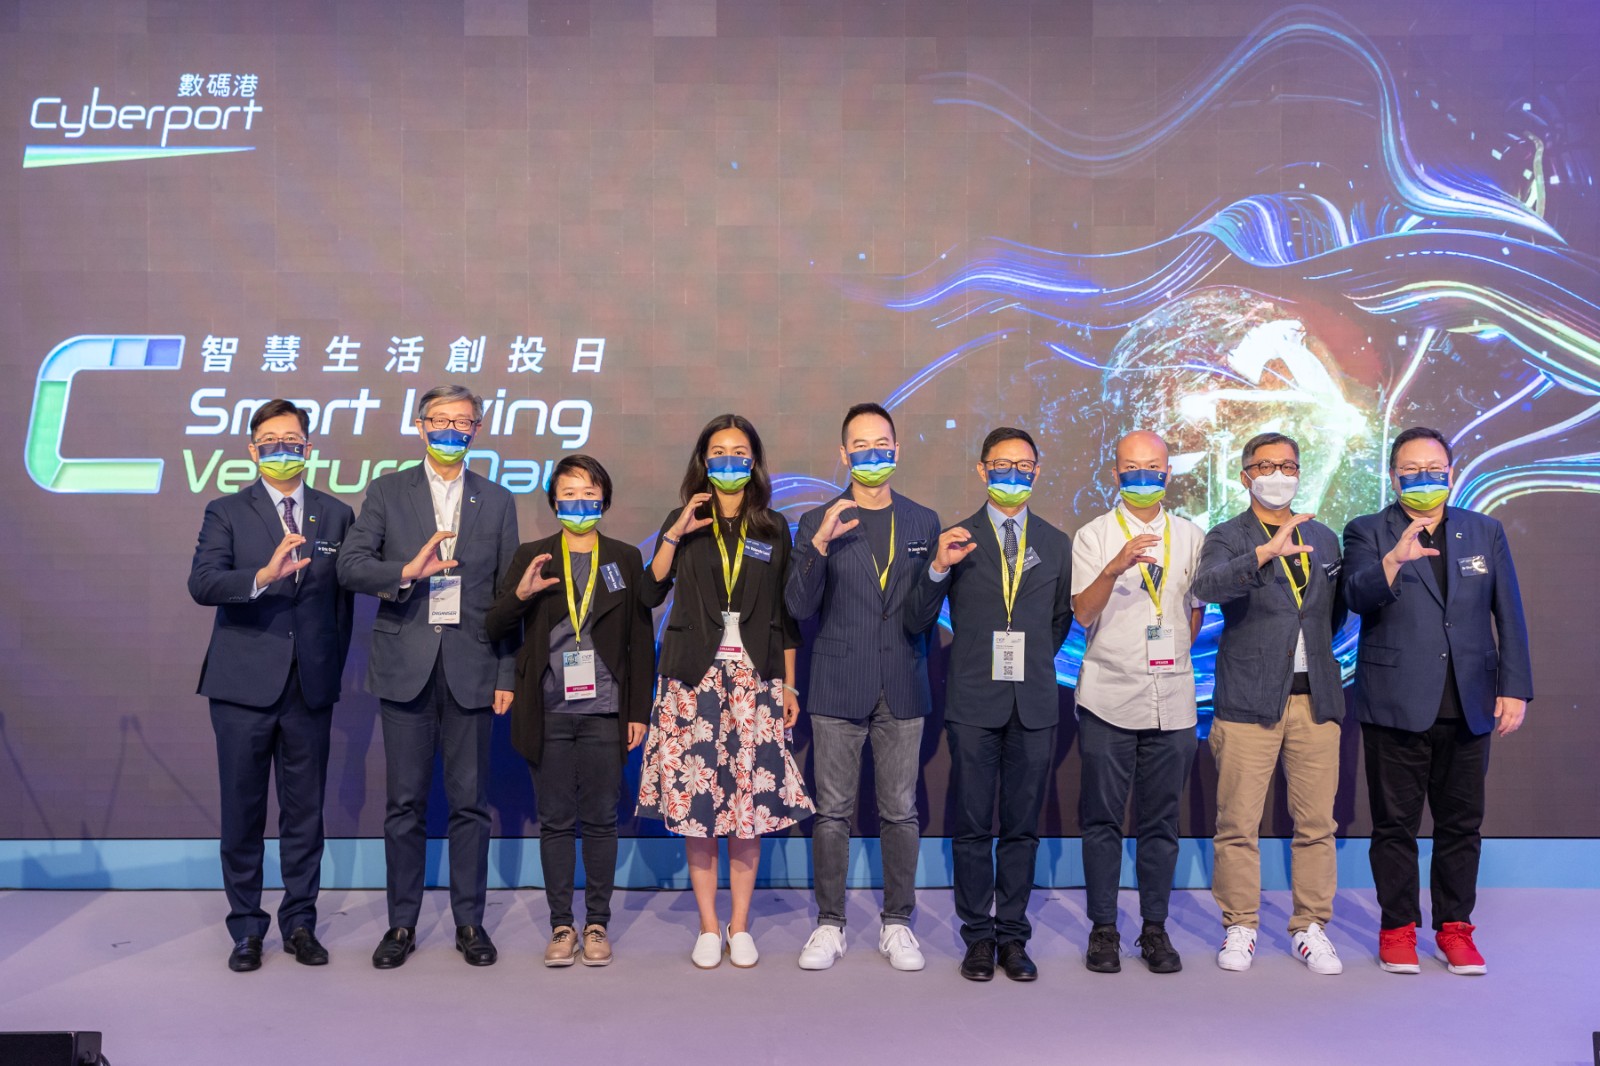 2022 Cyberport Venture Capital Forum facilitated over 300 fundraising matches